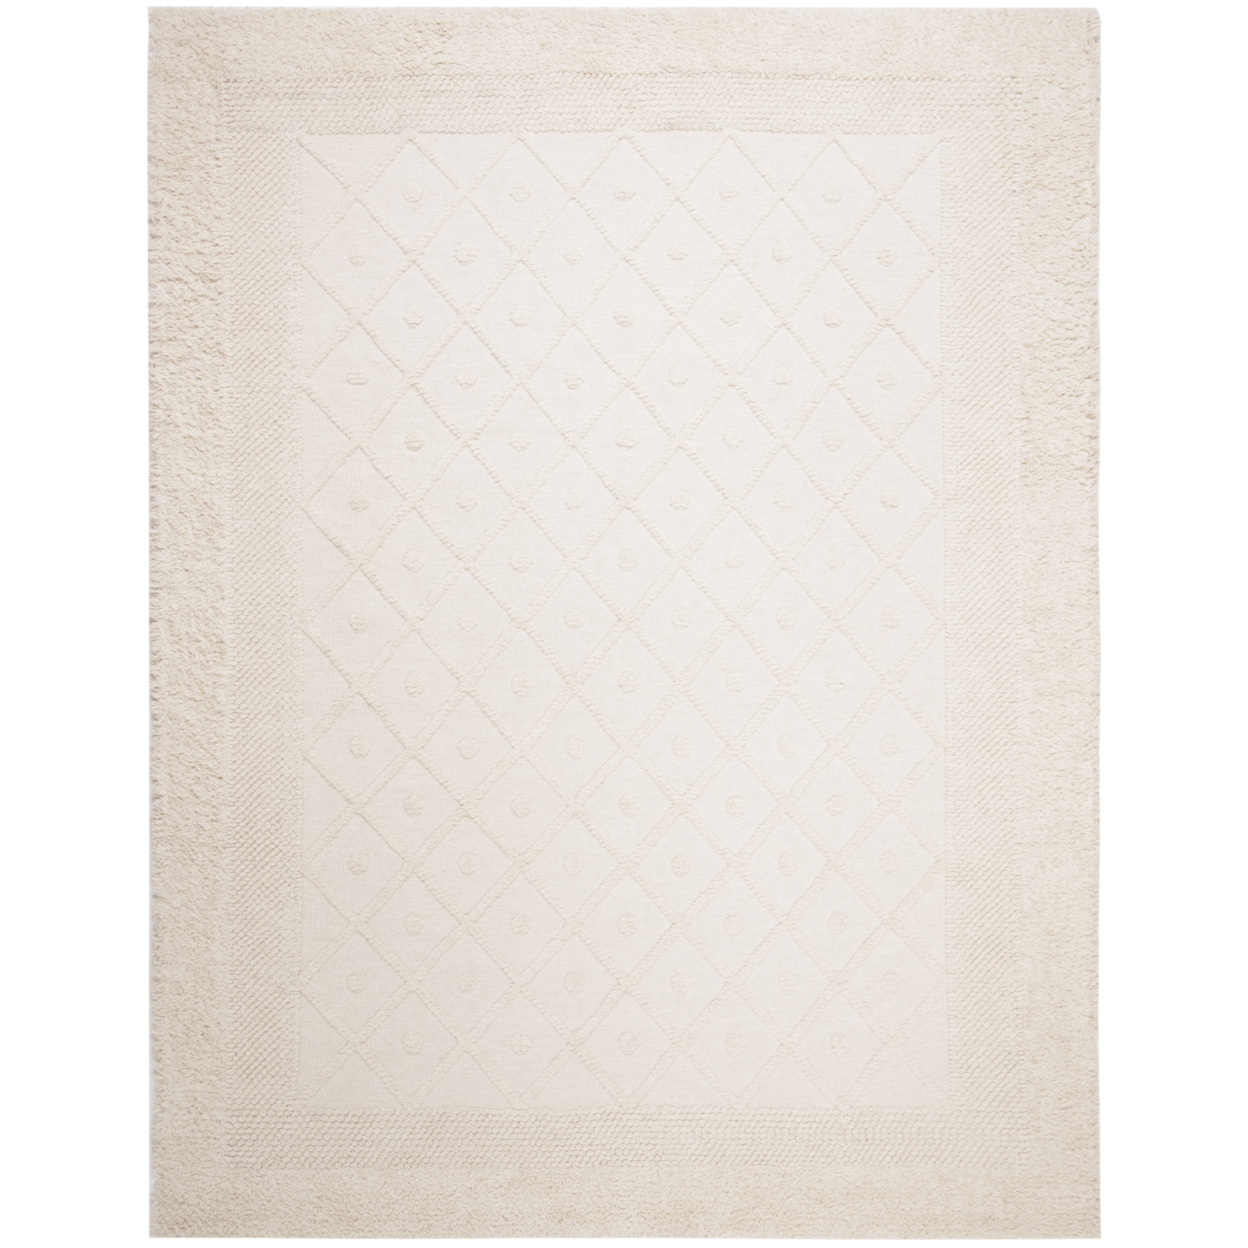 SAFAVIEH Kenya Collection KNY952A Hand-knotted Ivory Rug - 9' X 12'